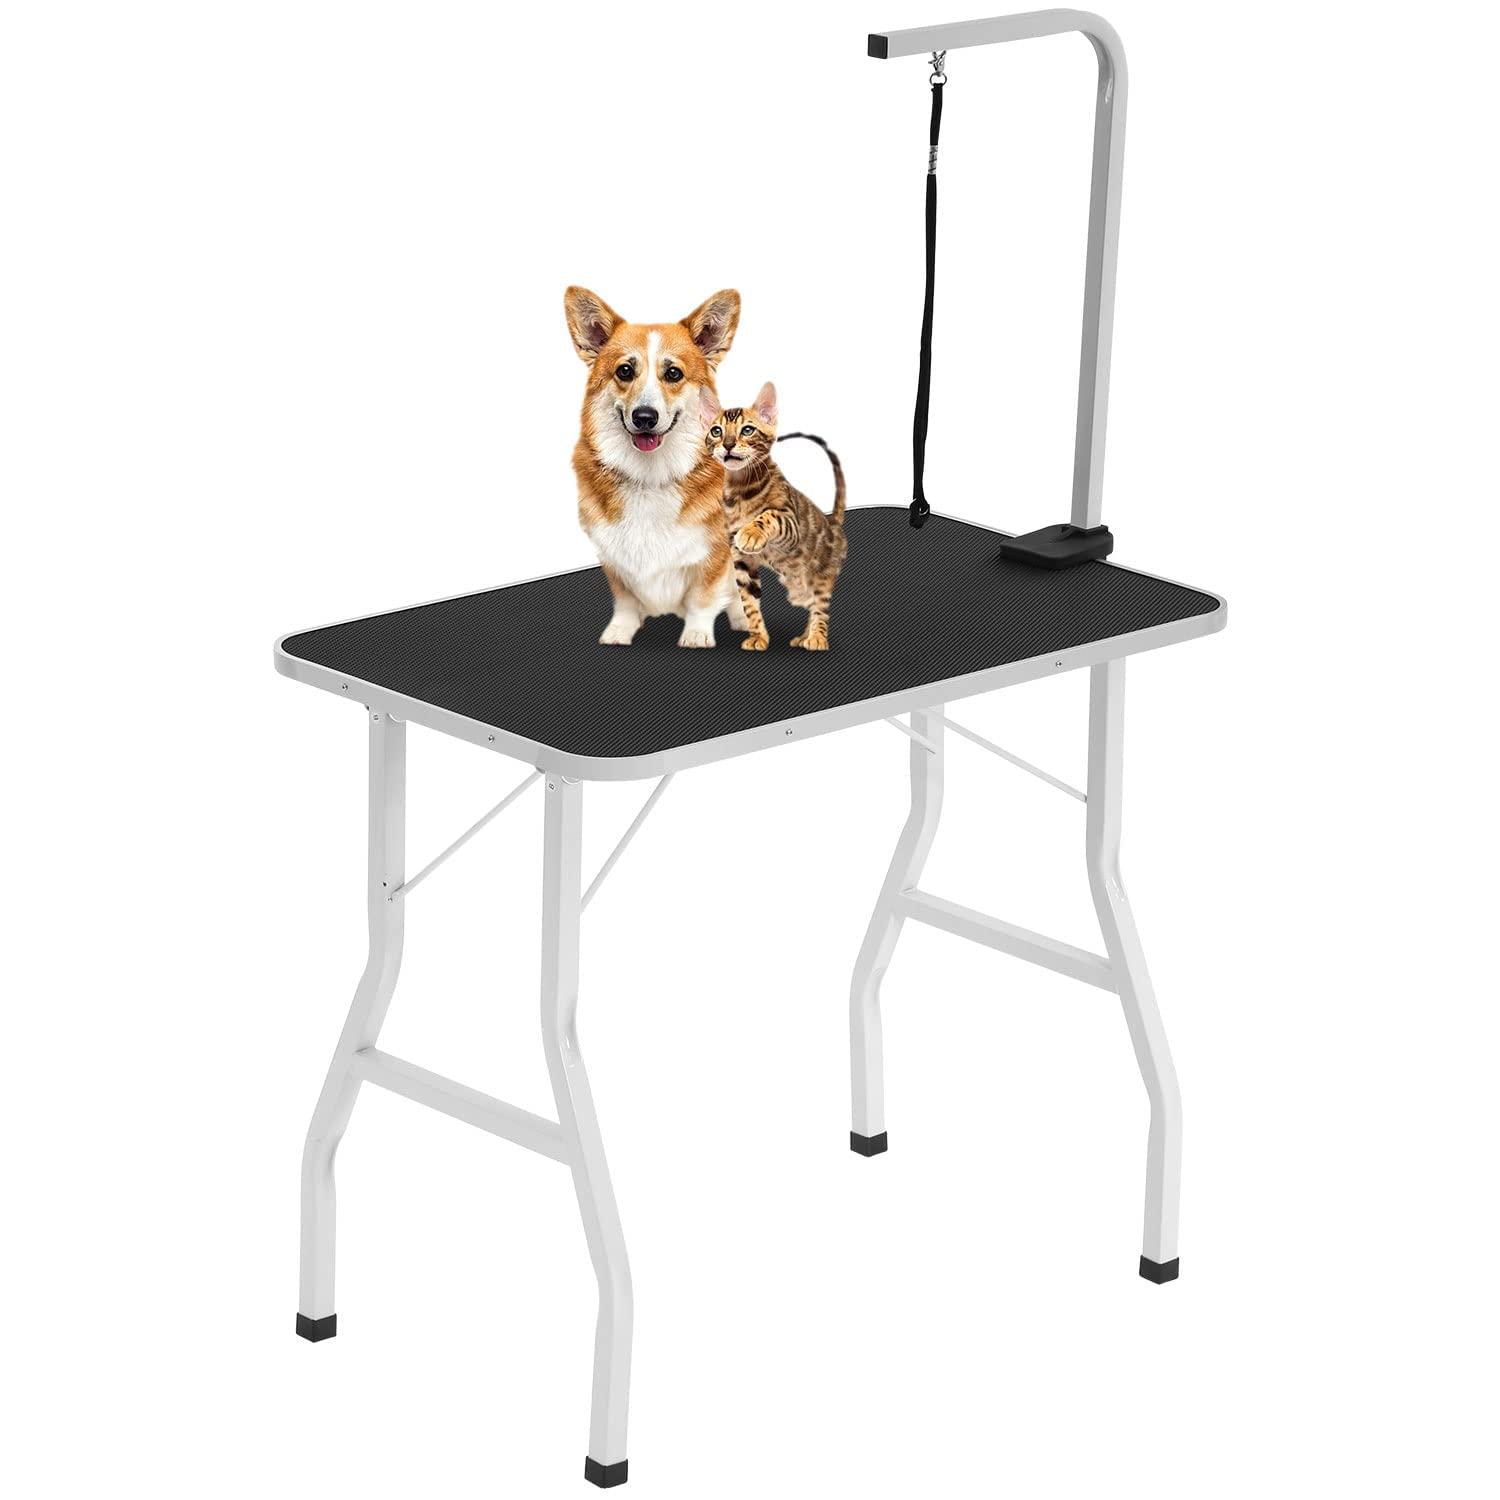 BestPet 32inch Foldable Dog Grooming Table with Adjustable Height Arm/Noose Heavy Duty Drying Table Portable Trimming Table Pet Grooming Table for Dogs Cats